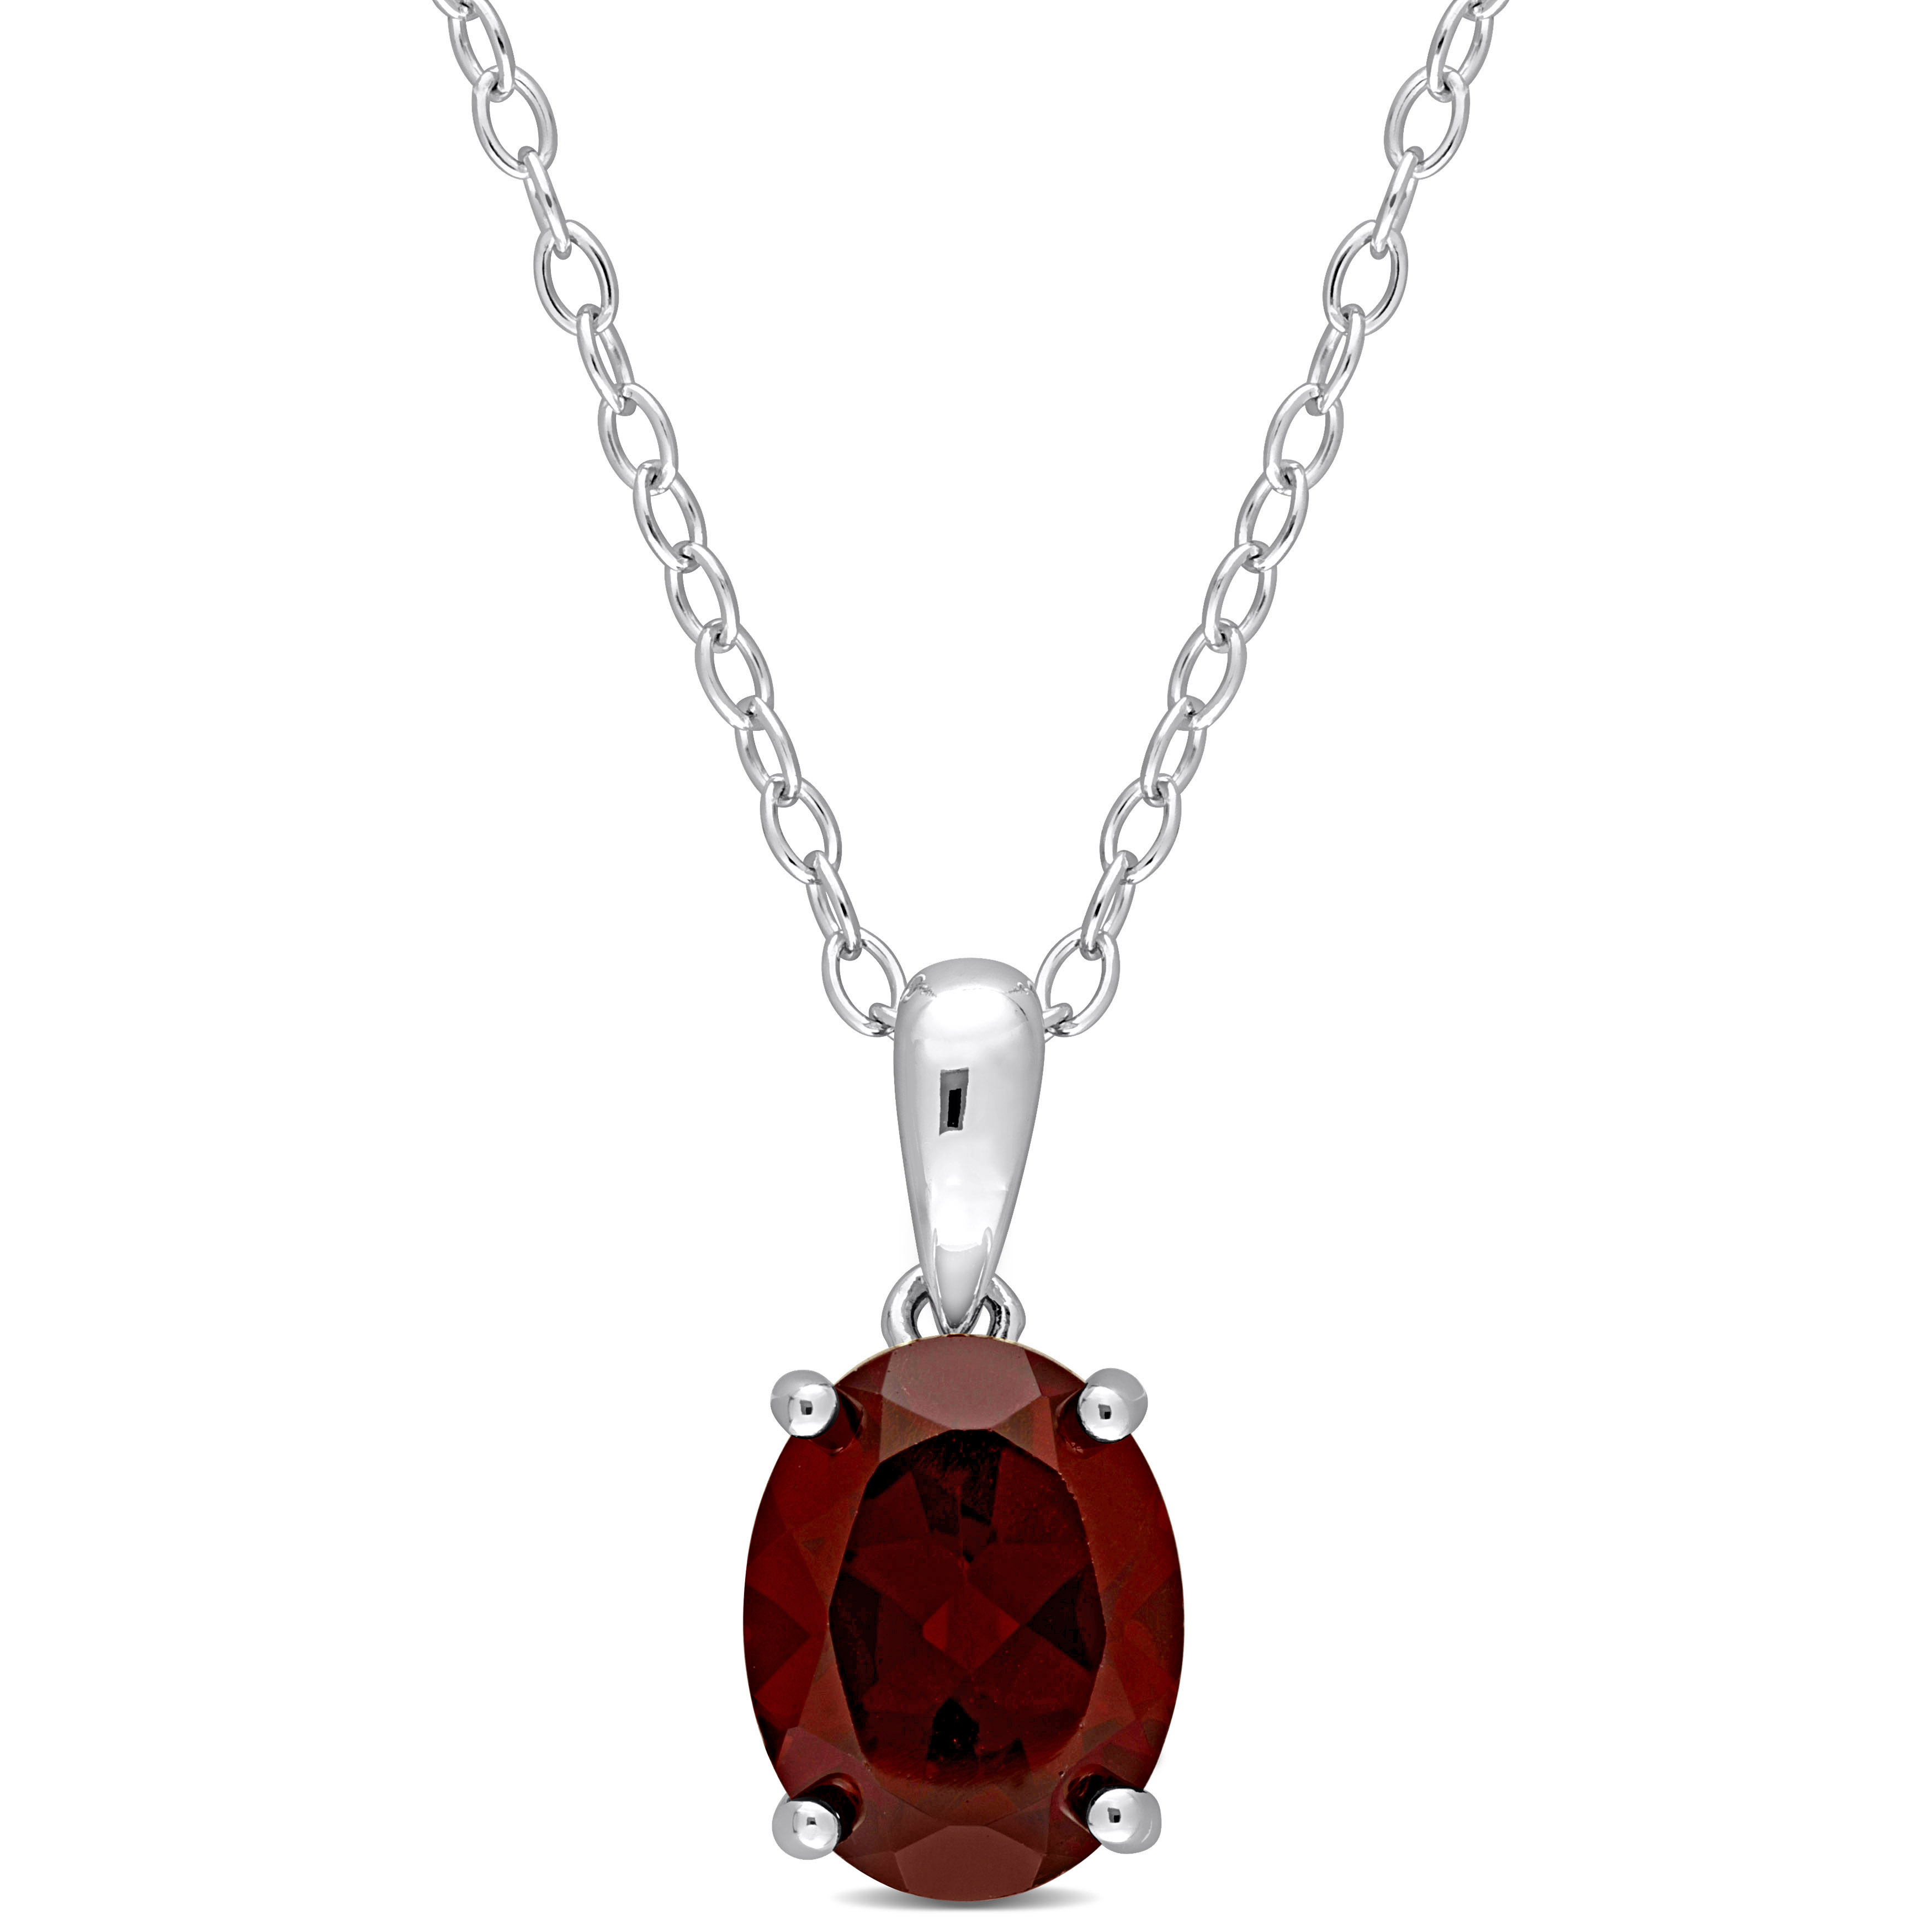 2 1/5 CT TGW Oval Garnet Solitaire Heart Design Pendant with Chain in Sterling Silver - 18 in.